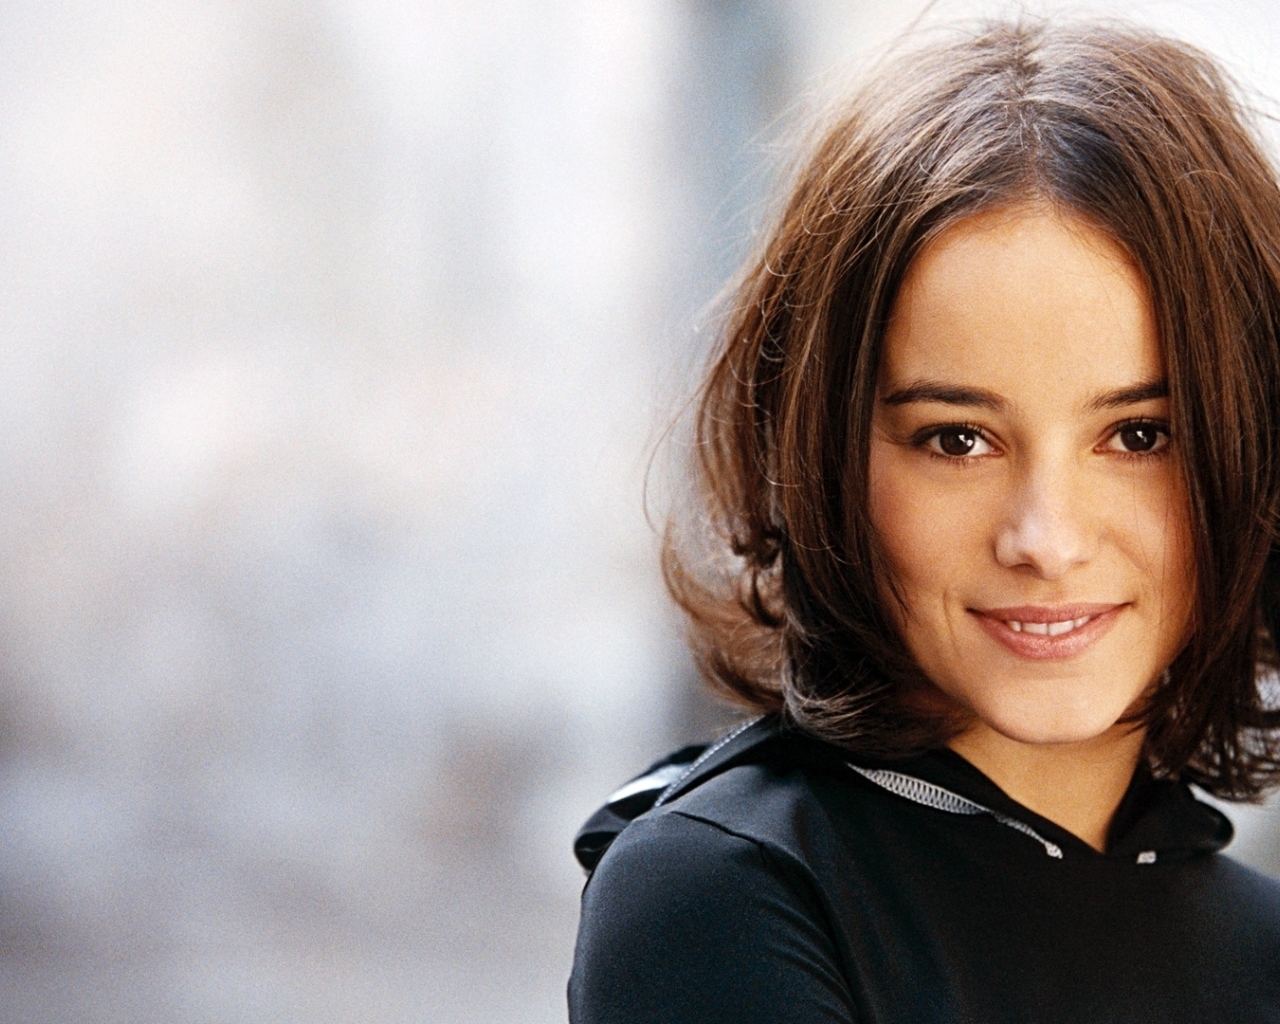 1280x1024 Alizee Girl Smile 1280x1024 Resolution Wallpaper Hd Music 4k Wallpapers Images